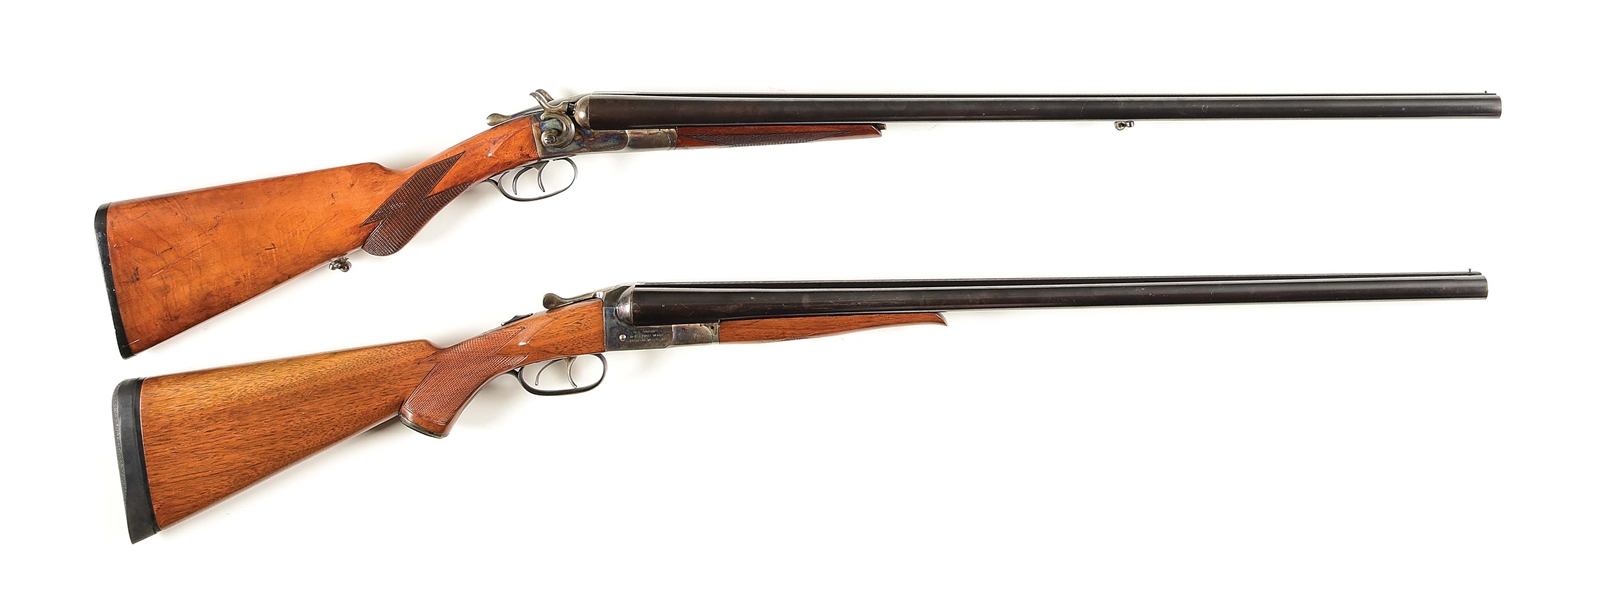 (C) LOT OF 2: IVER JOHNSON HERCULES GRADE AND HOPKINS & ALLEN ARMS CO. FOREHAND SIDE BY SIDE SHOTGUNS